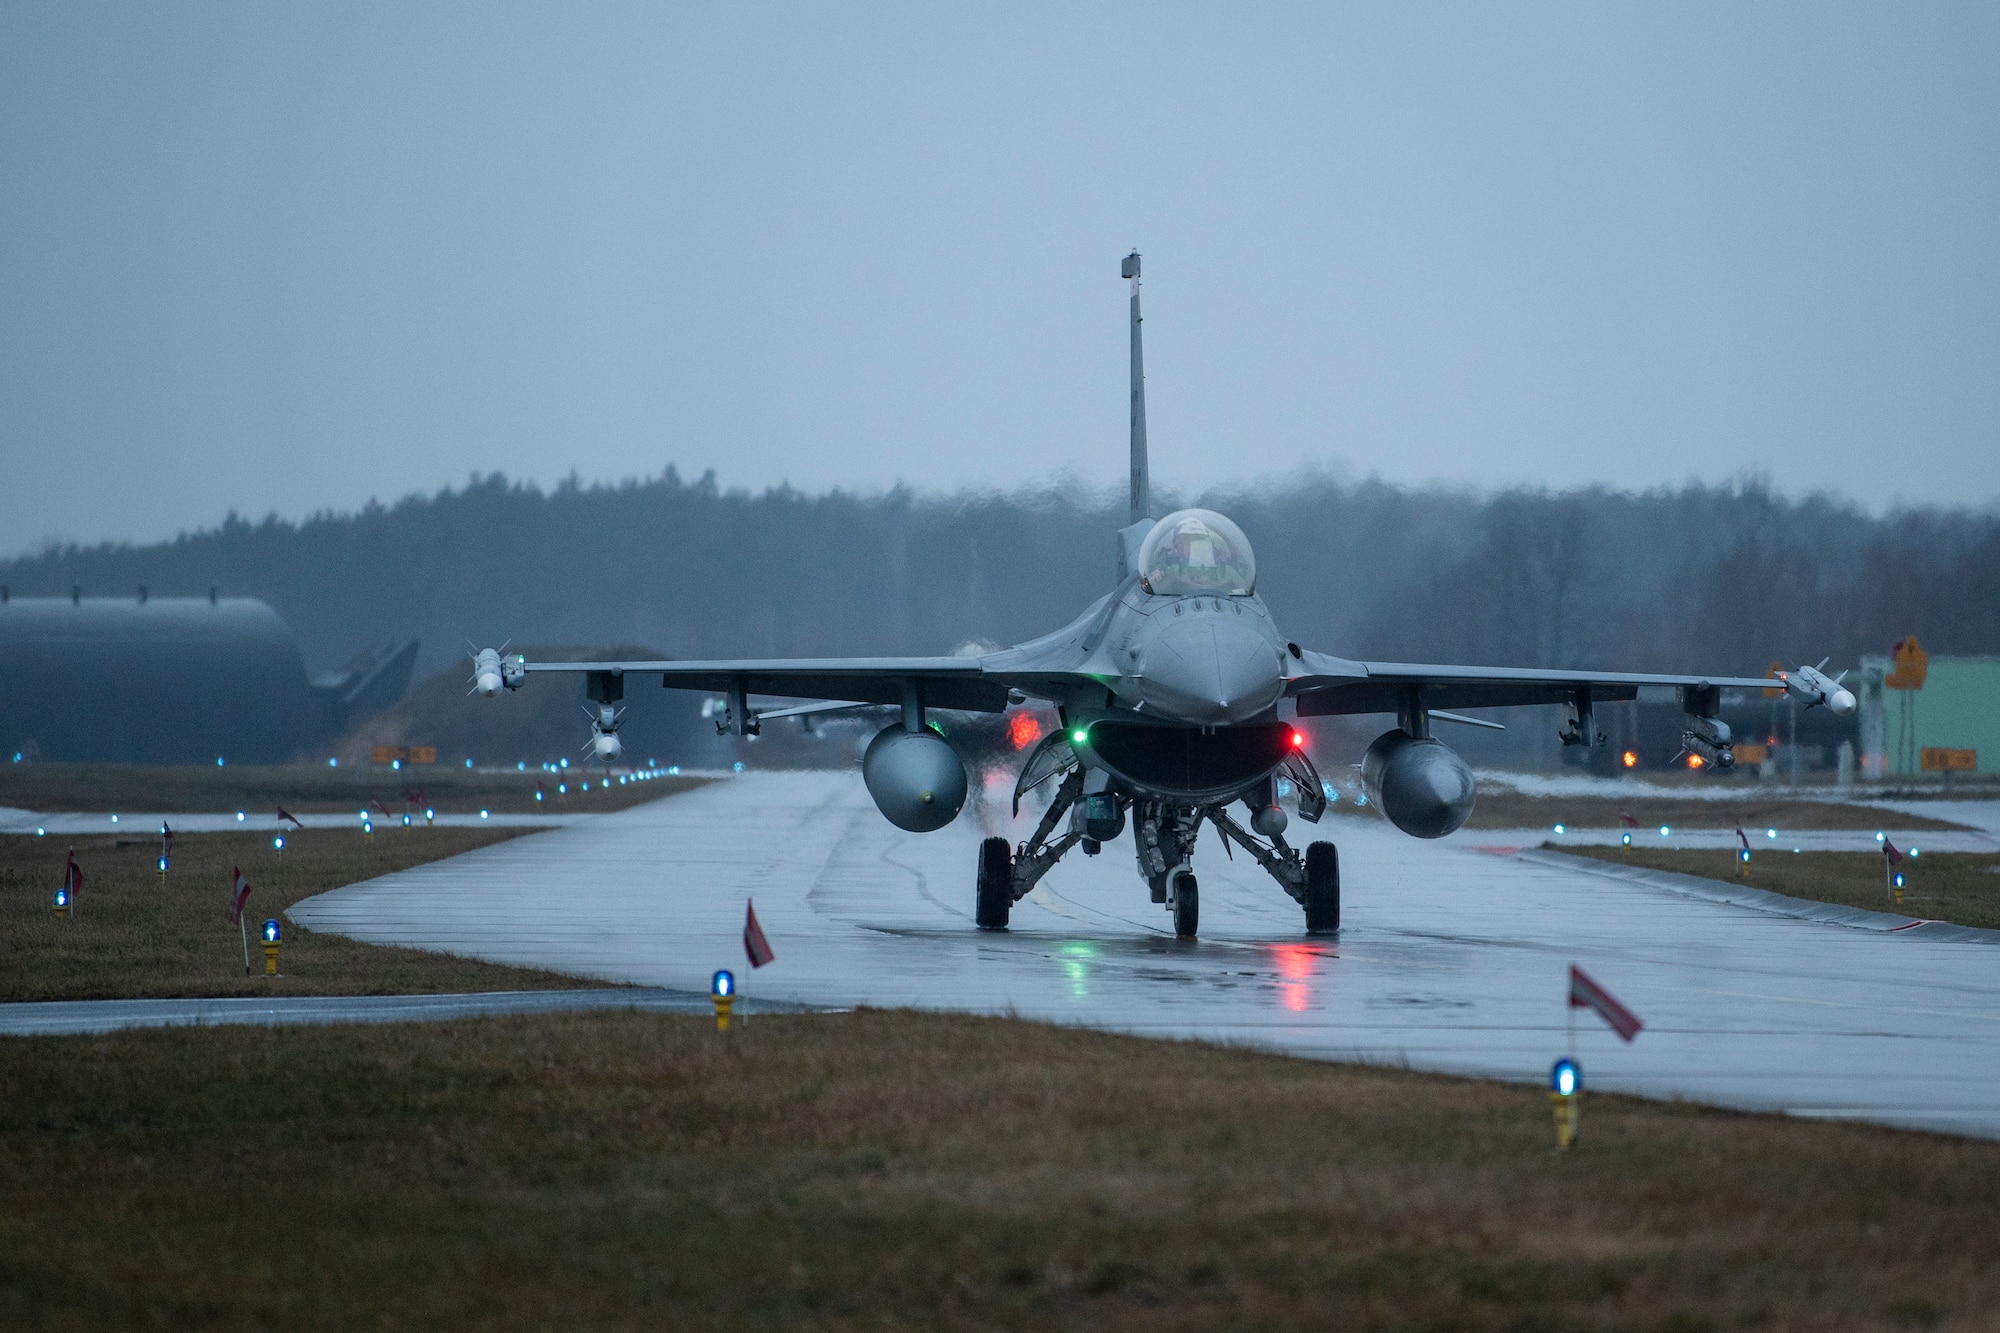 A U.S. Air Force F-16 Fighting Falcon assigned to the 480th Fighter Squadron at Spangdahlem Air Base, Germany, taxis at Łask Air Base, Poland, January 4, 2022.